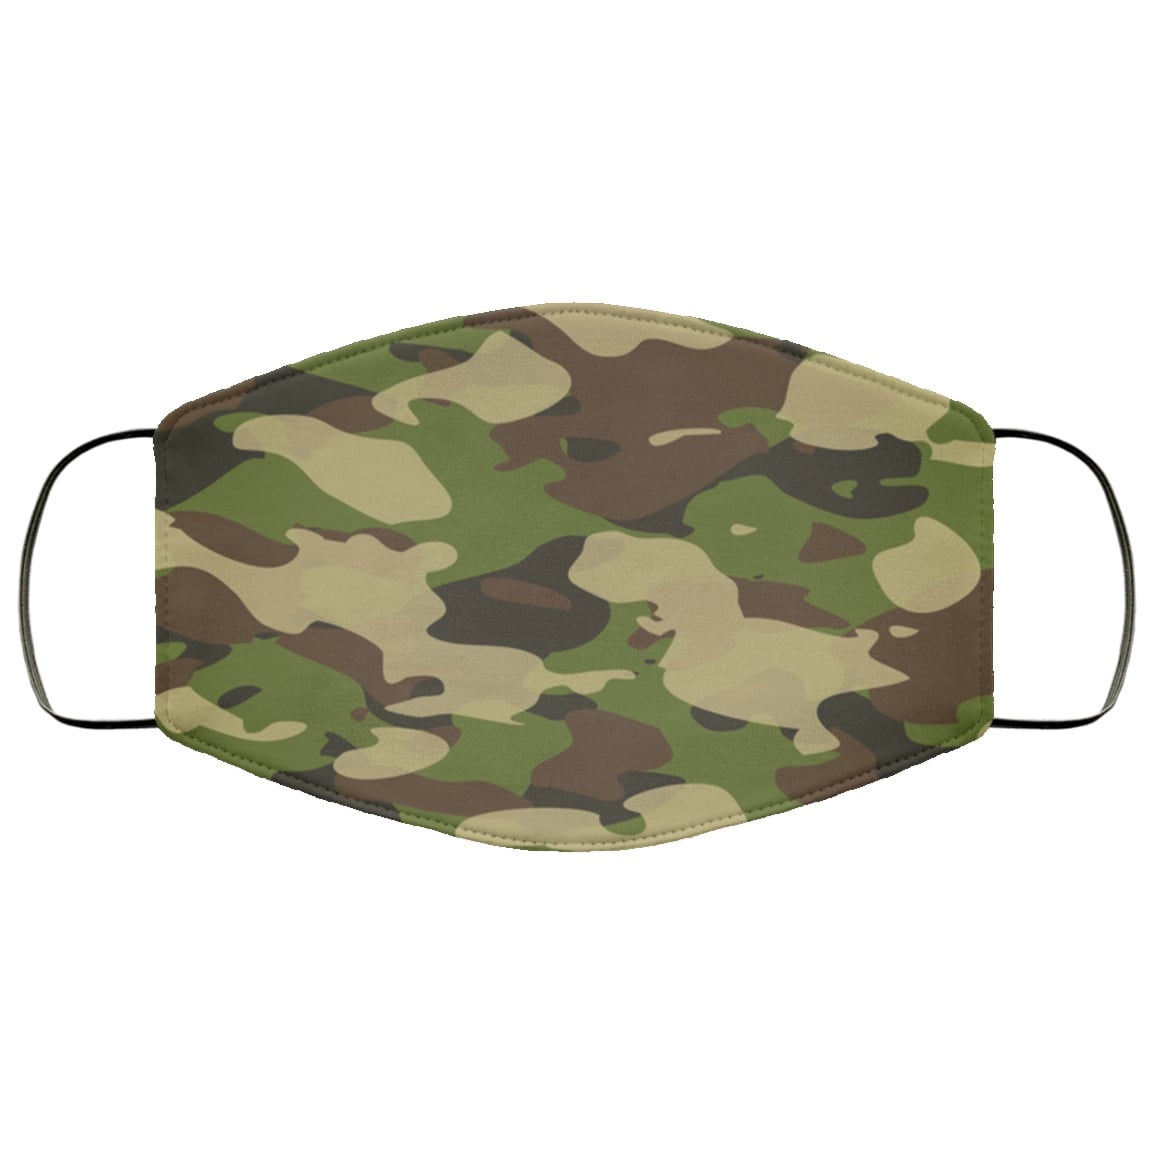 Camouflage army military anti pollution face mask 1